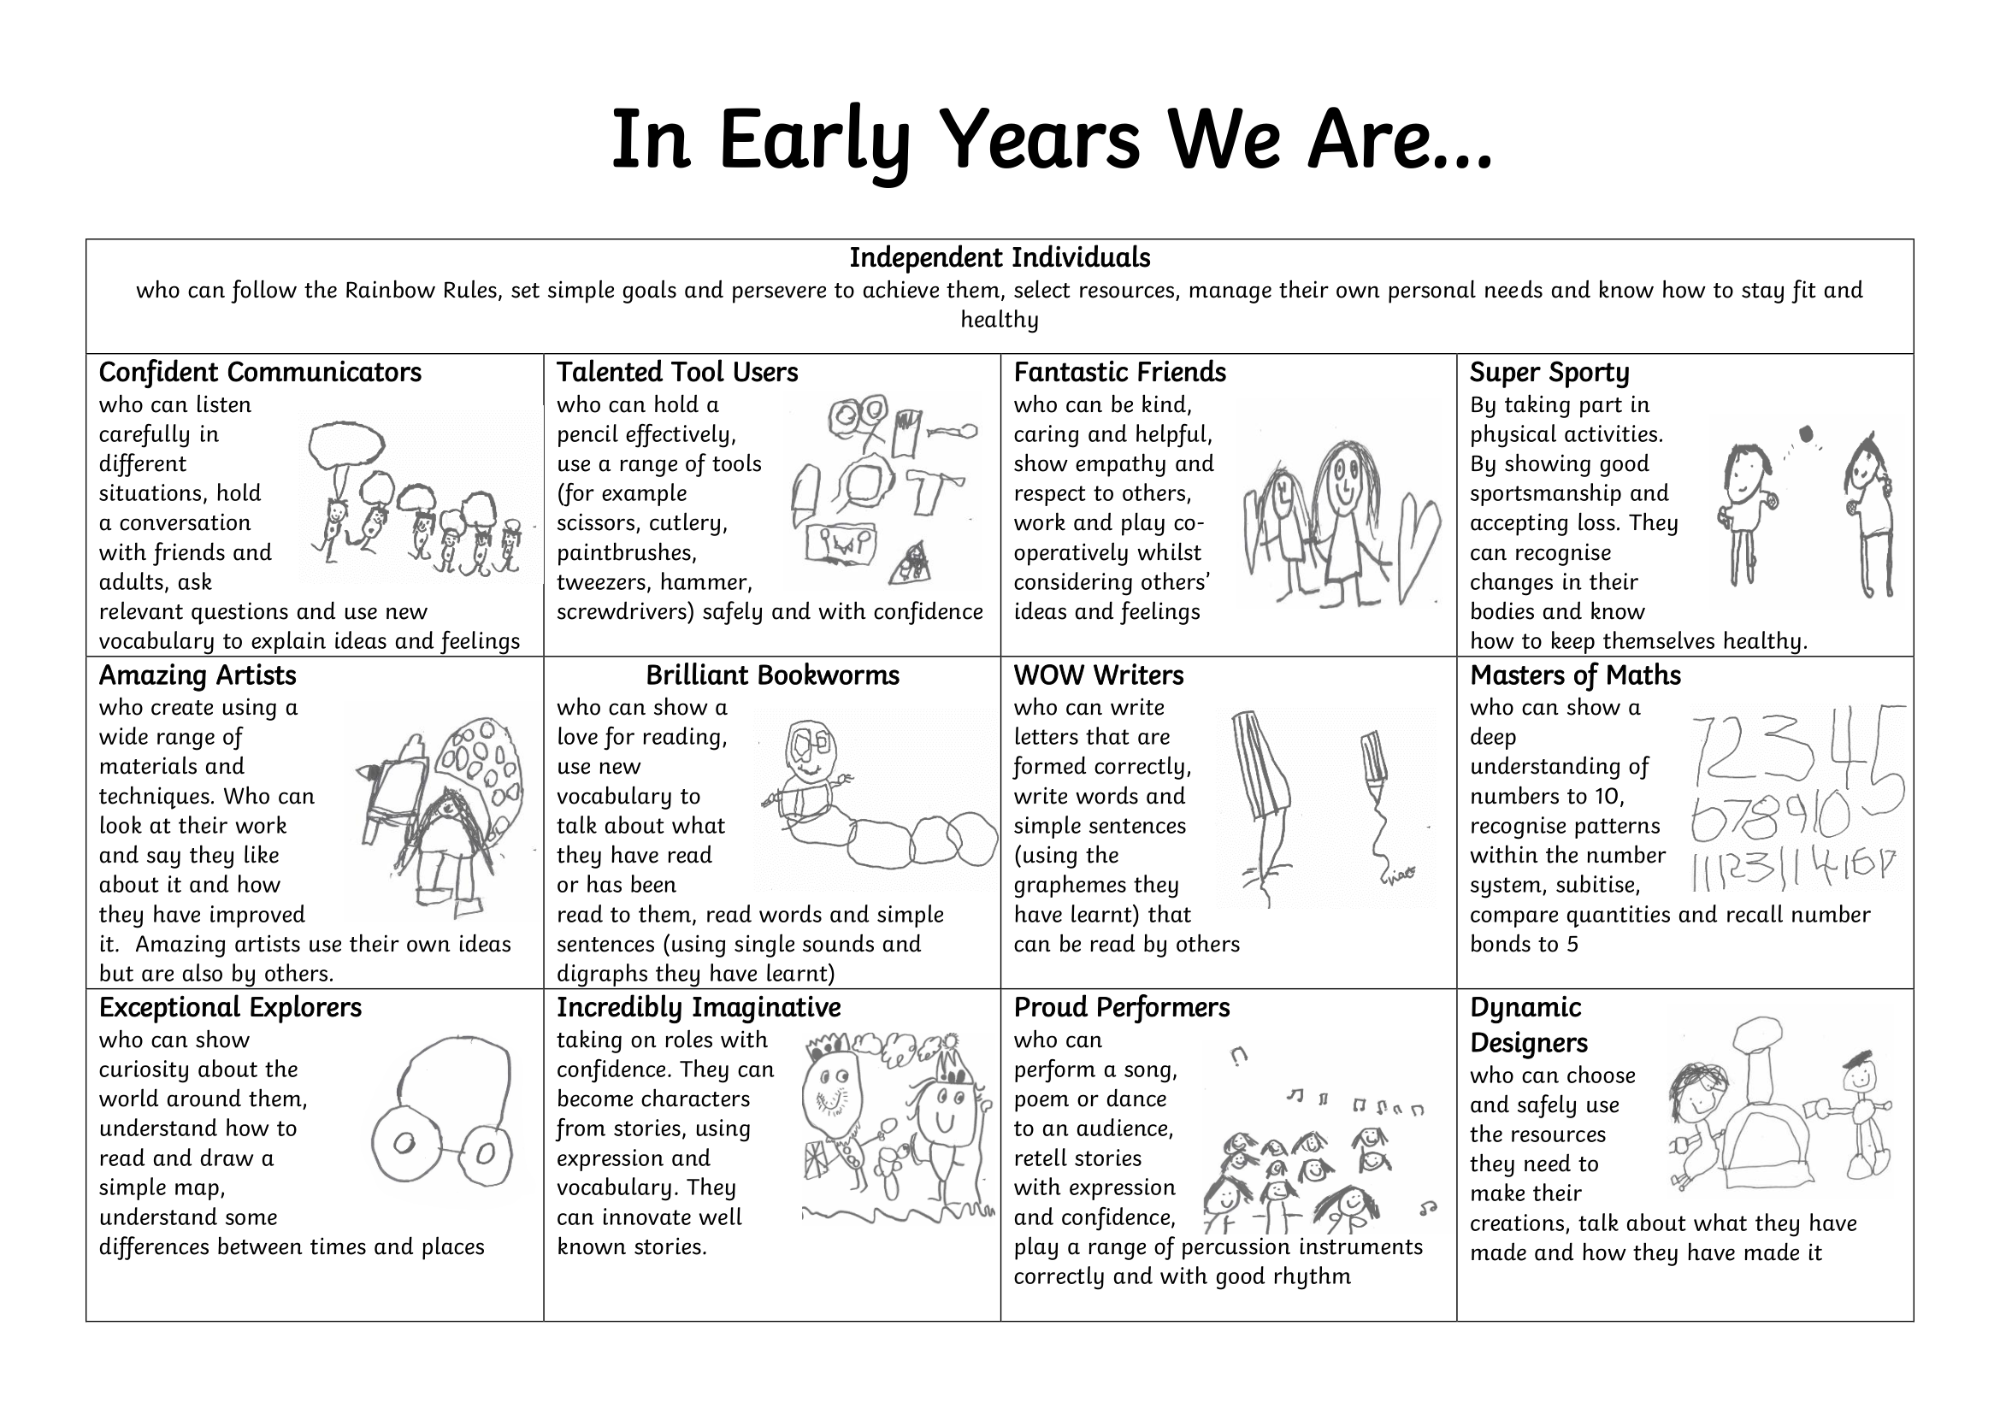 Image of "In Early Years We Are..."